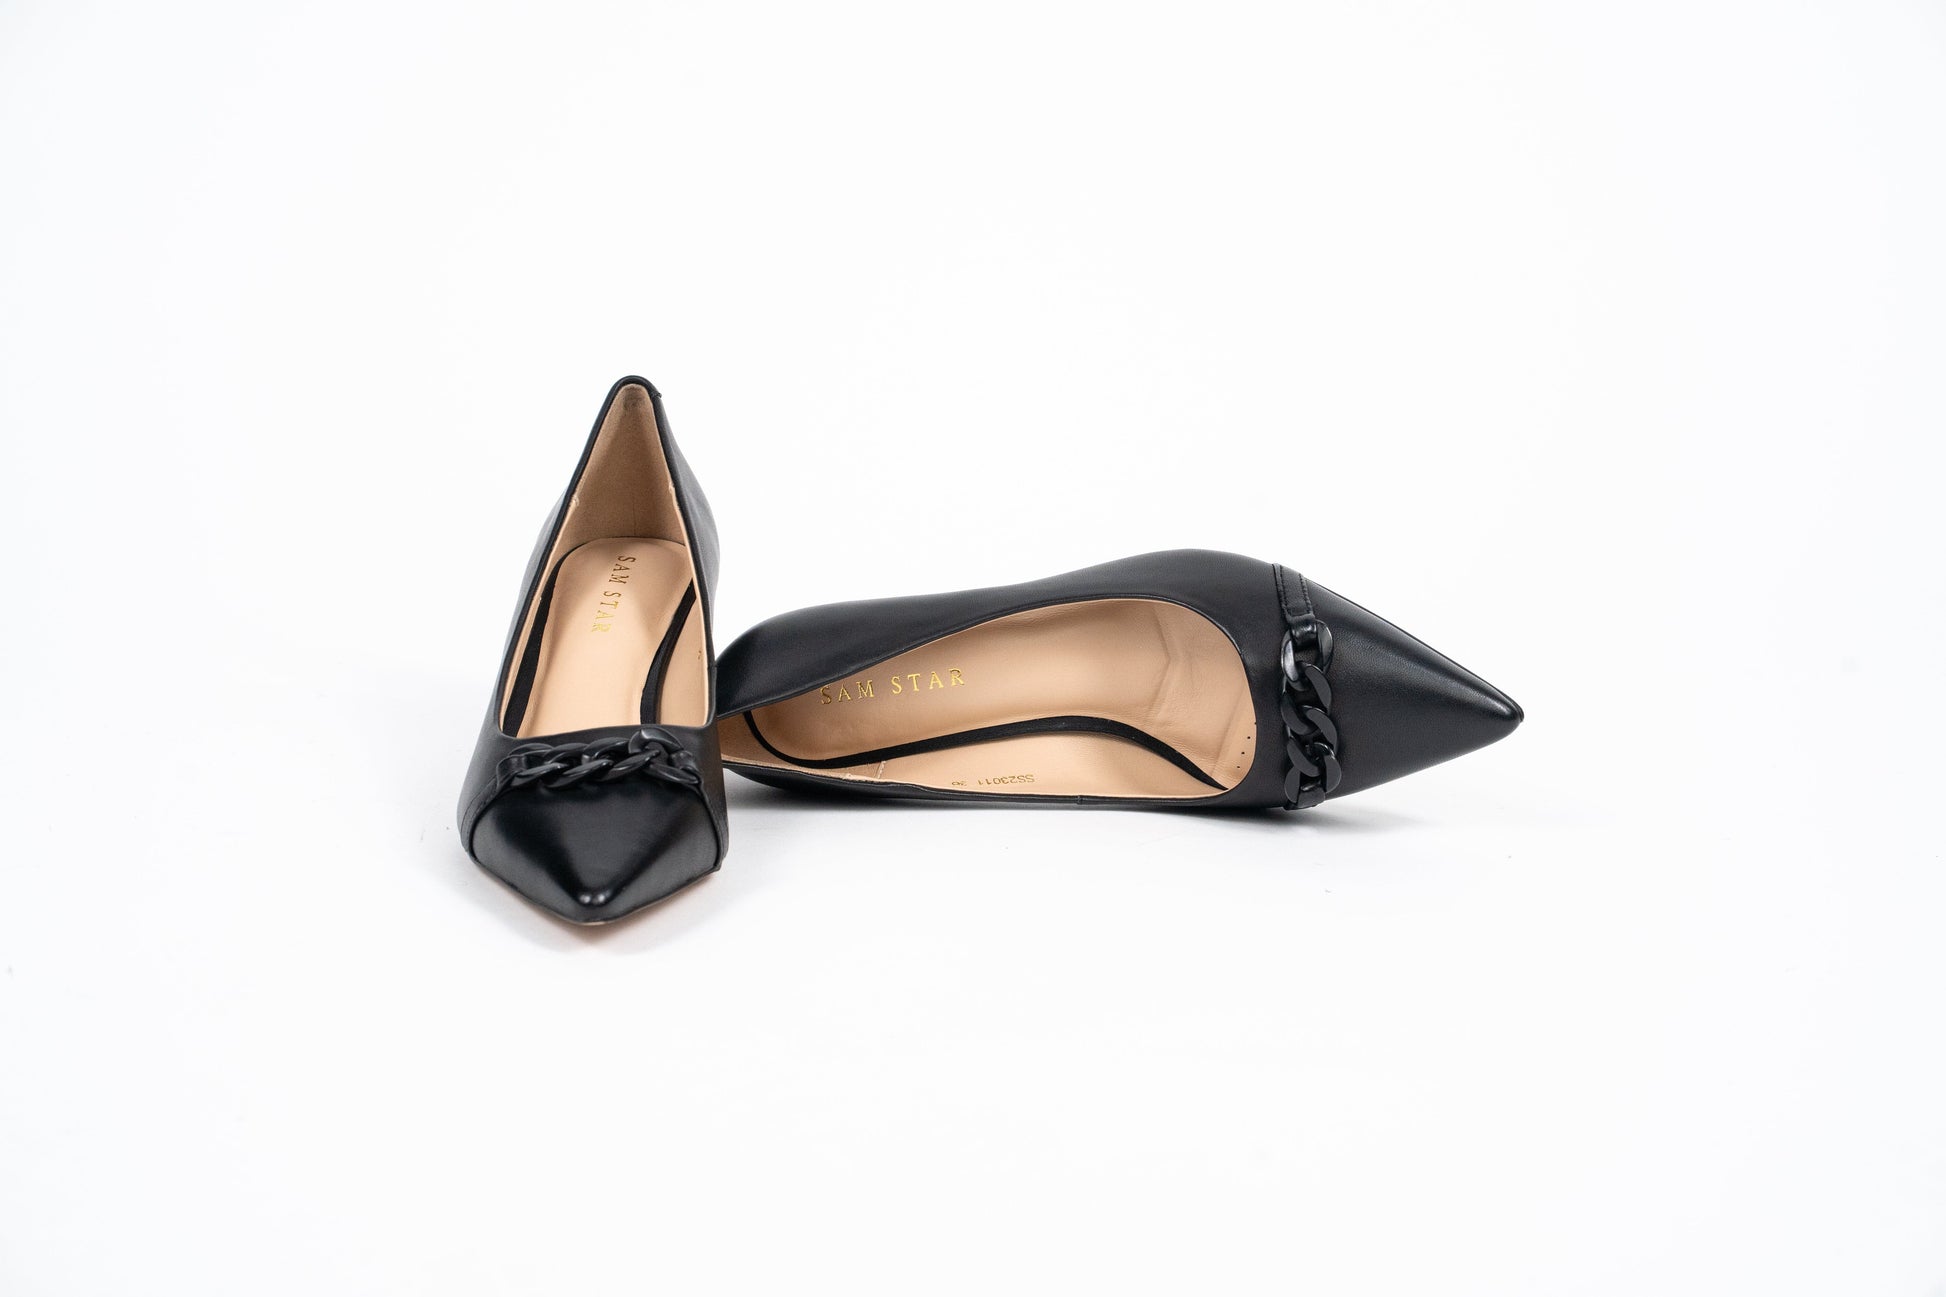 SS23011 Leather court shoes with chain detail - Black (New Arrival) ladies shoes Sam Star shoes Black 38/5 